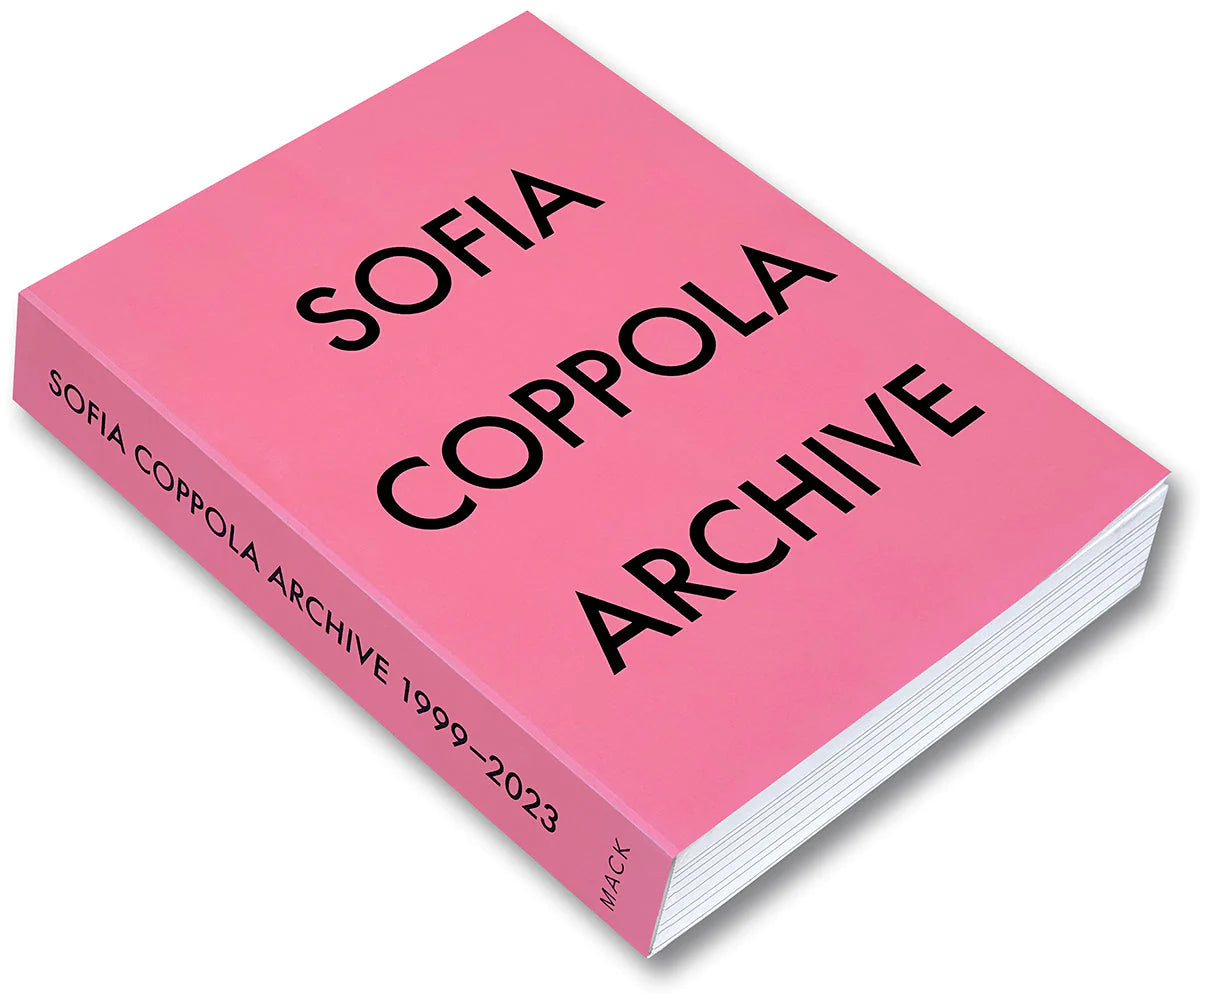 Sofia Coppola's New Book Offers a Glimpse Inside Her Mind